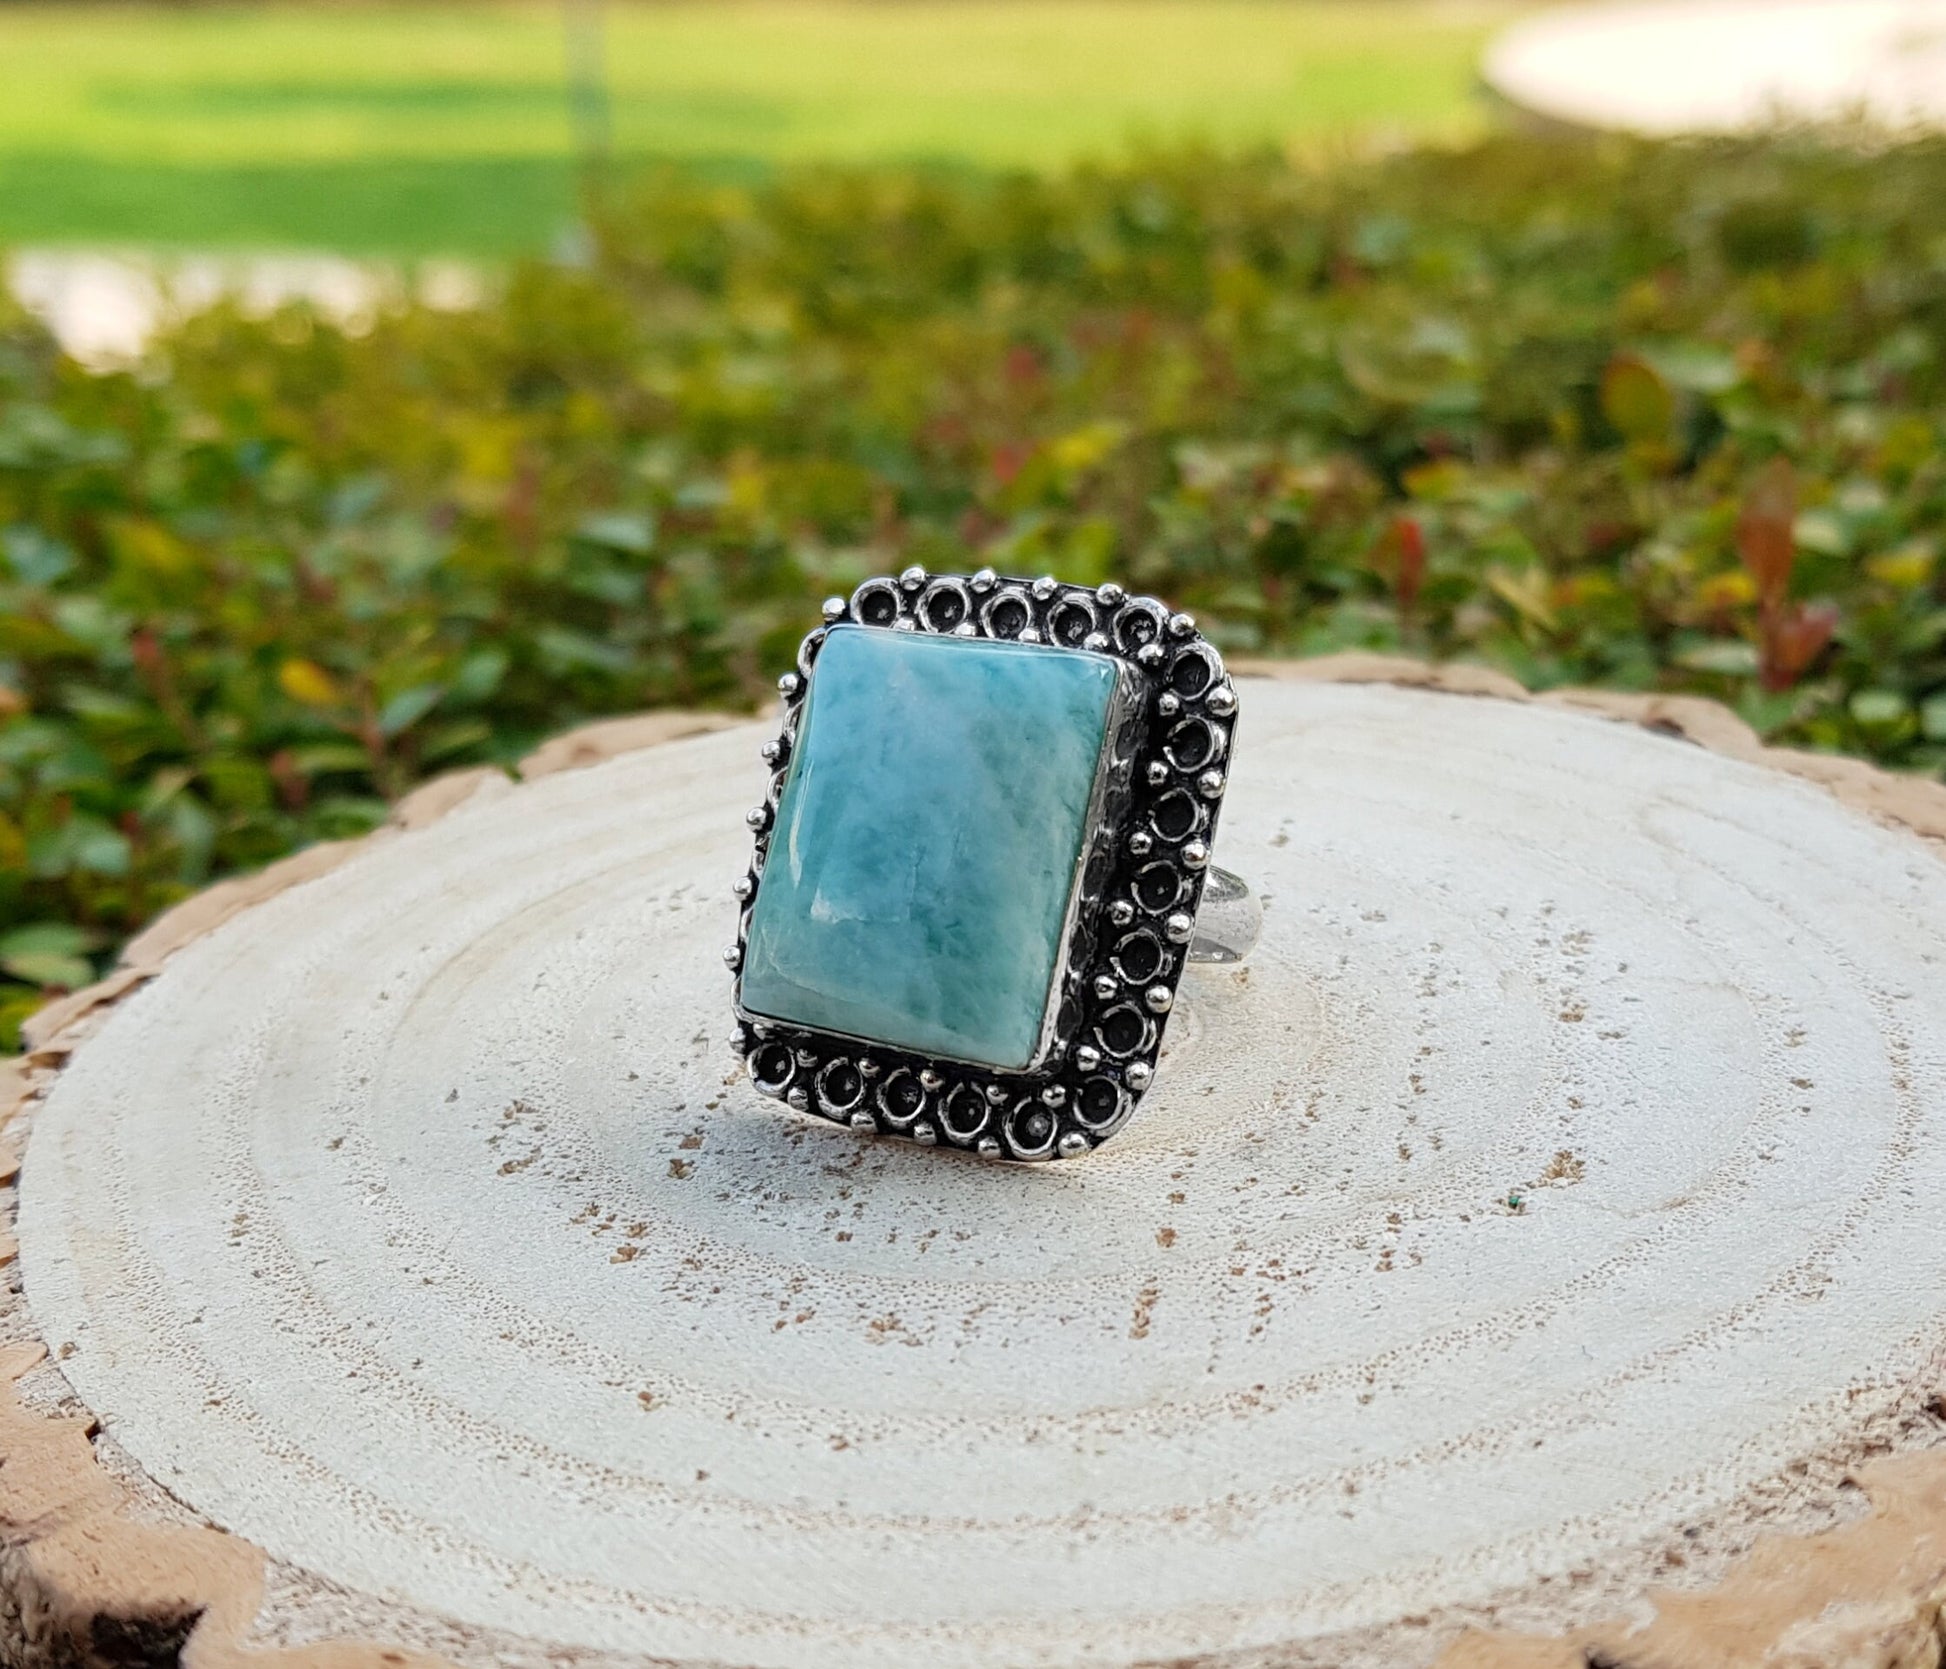 Amazonite Statement Ring Sterling Silver Gemstone Ring Size US 8 Boho Ring Unique Gift GypsyJewelry Ethnic Ring One Of A Kind Jewelry